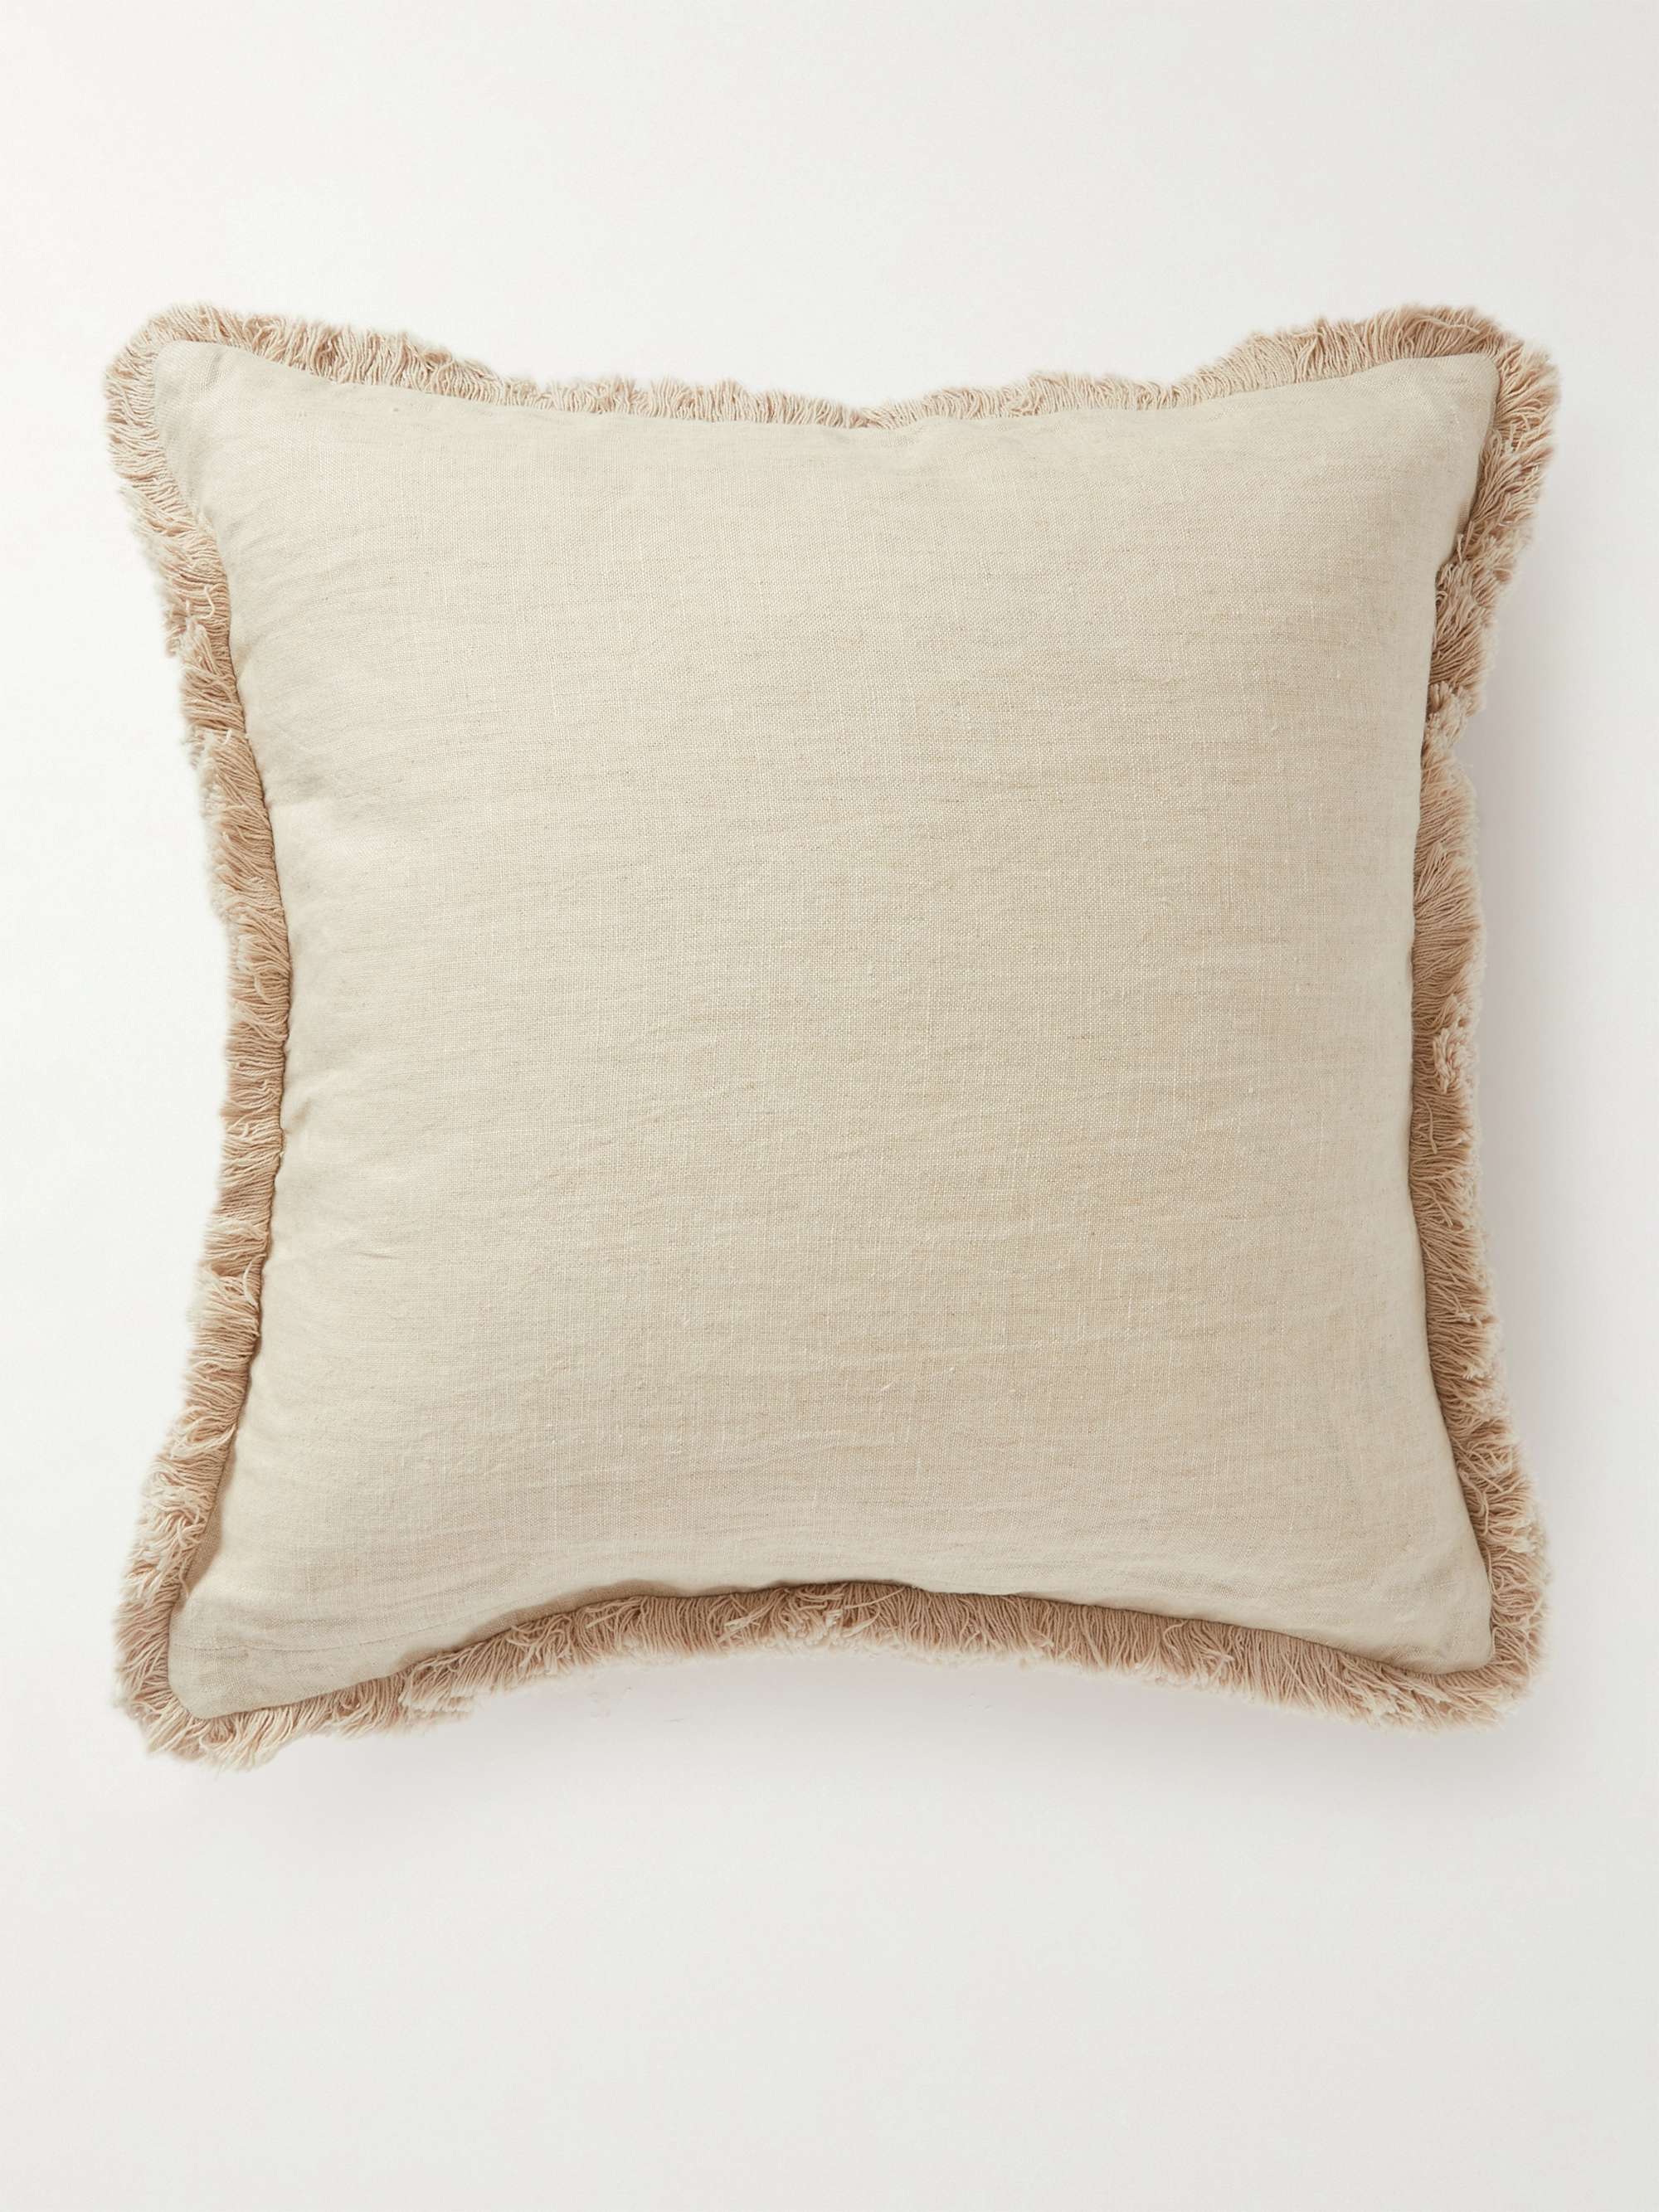 THE CONRAN SHOP Dancing Friends Fringed Embroidered Linen Cushion